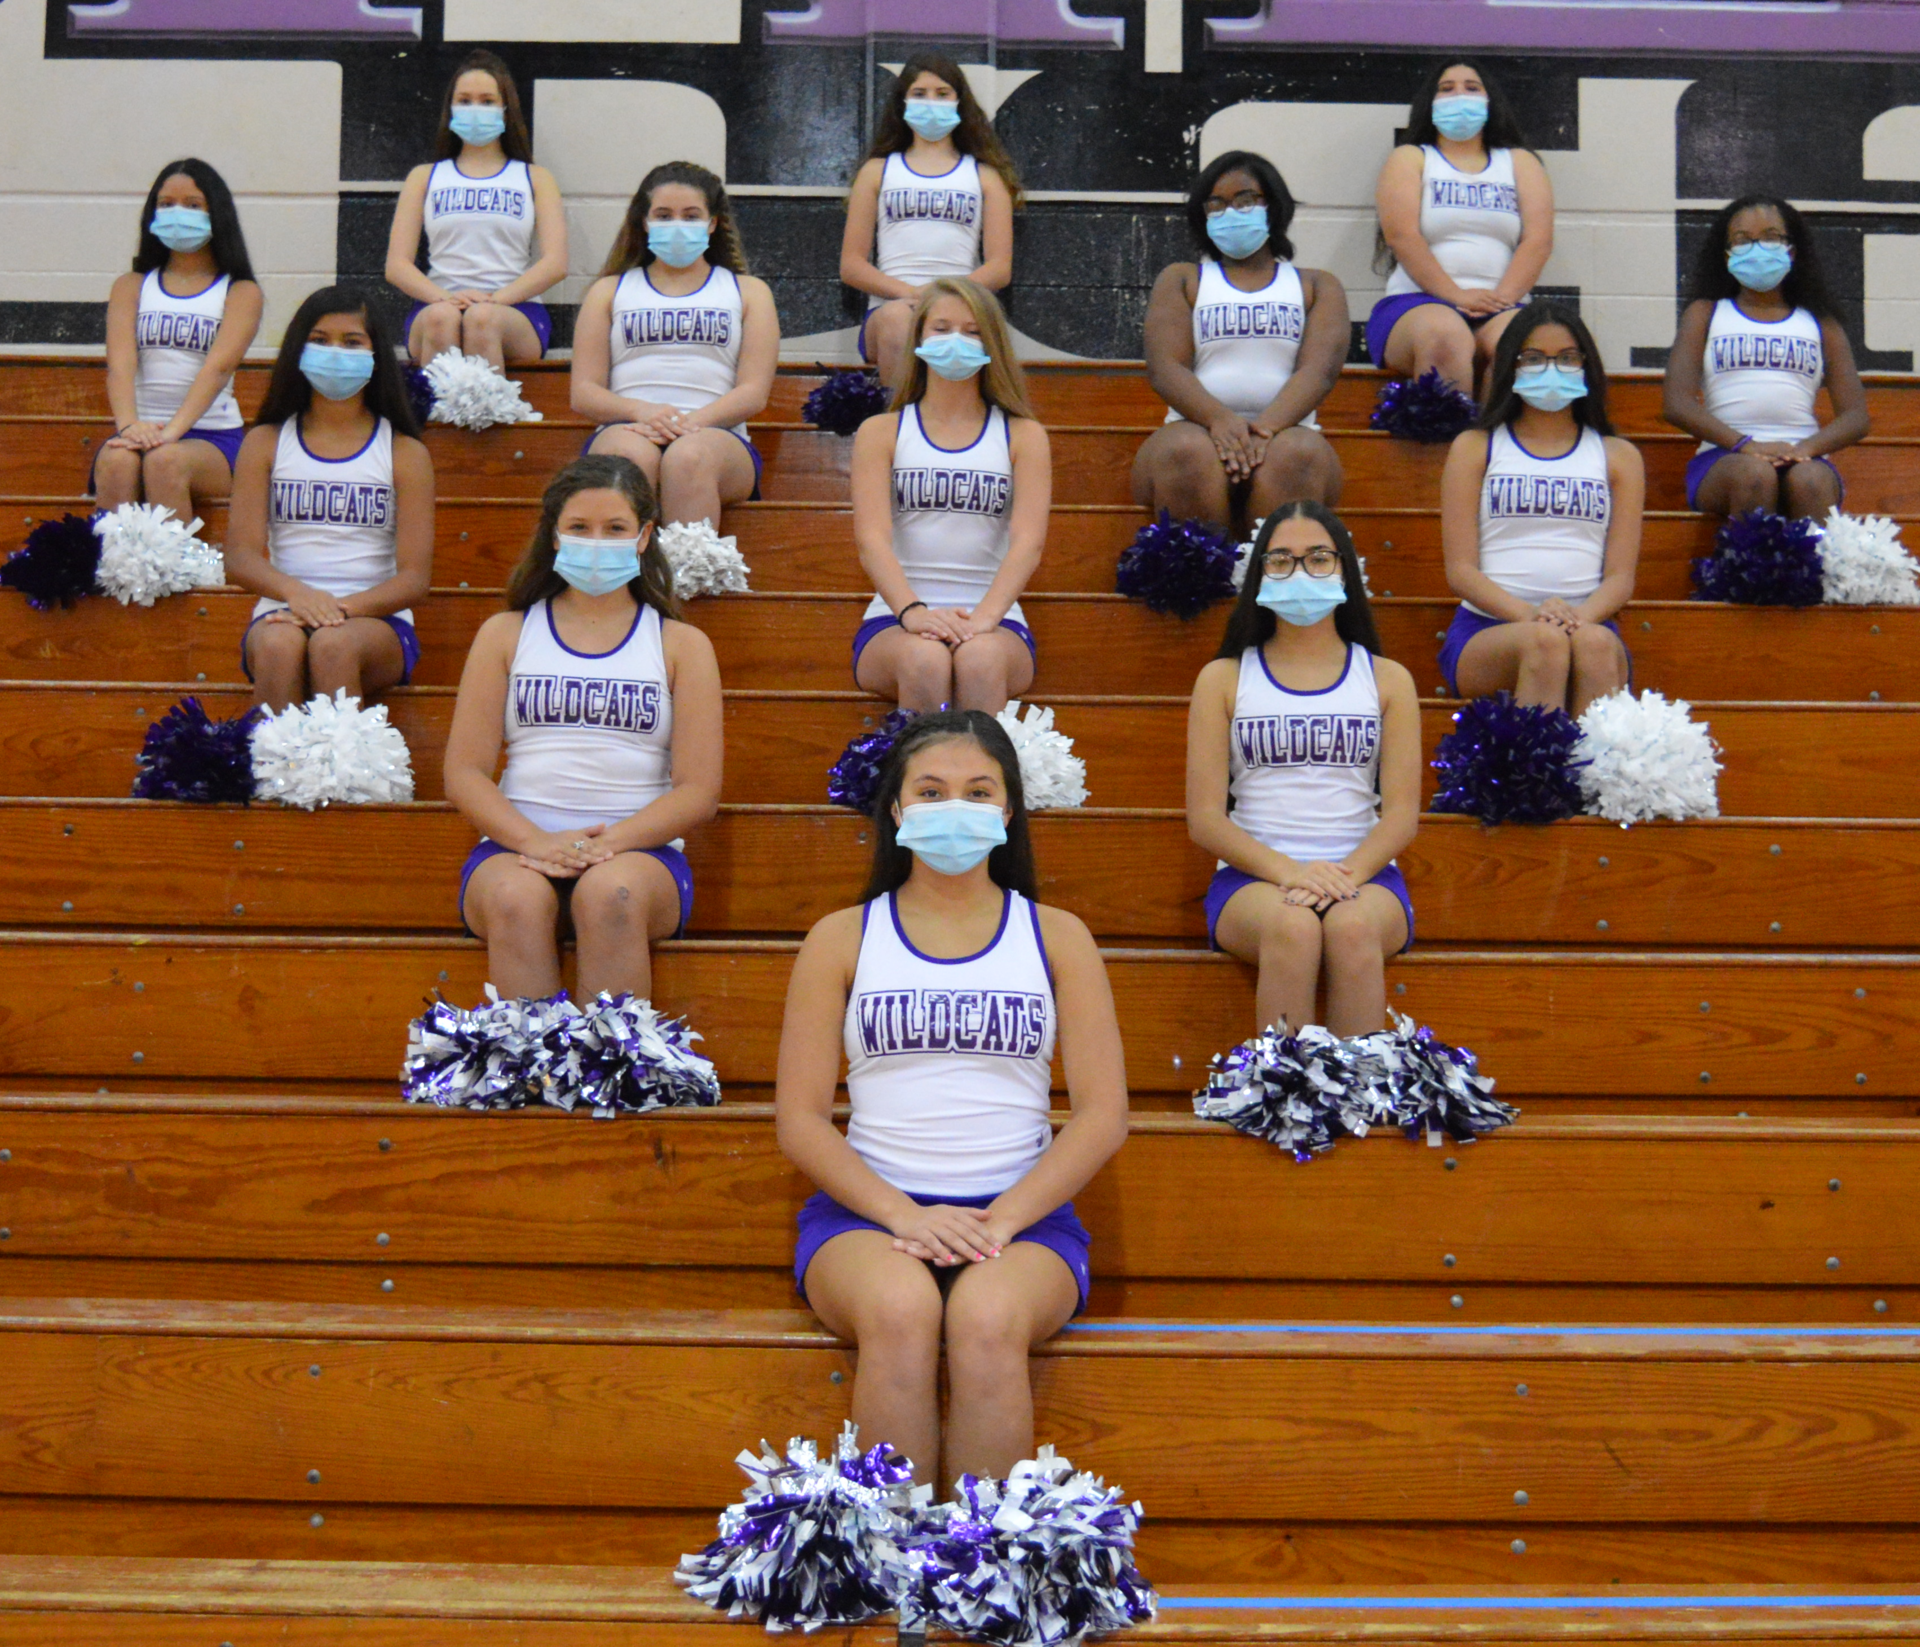 Cheerleader group picture socially distanced and with masks on